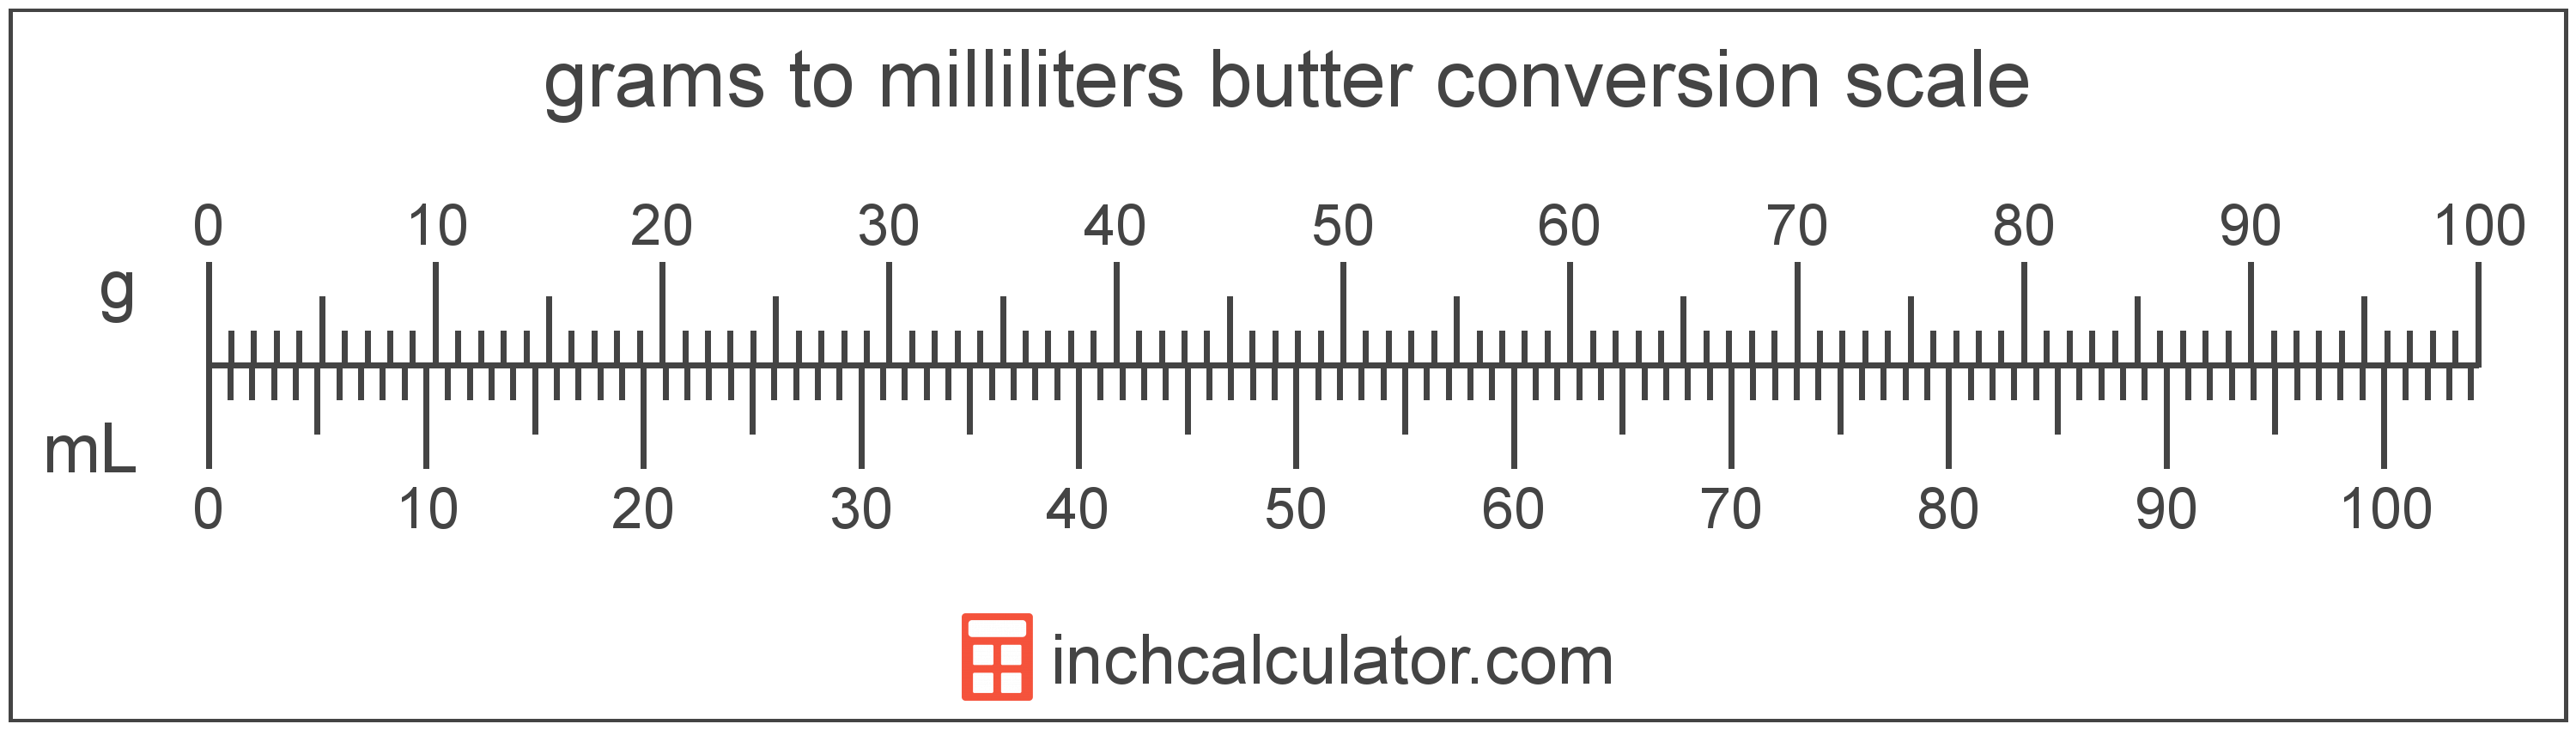 conversion scale showing milliliters and equivalent grams butter values